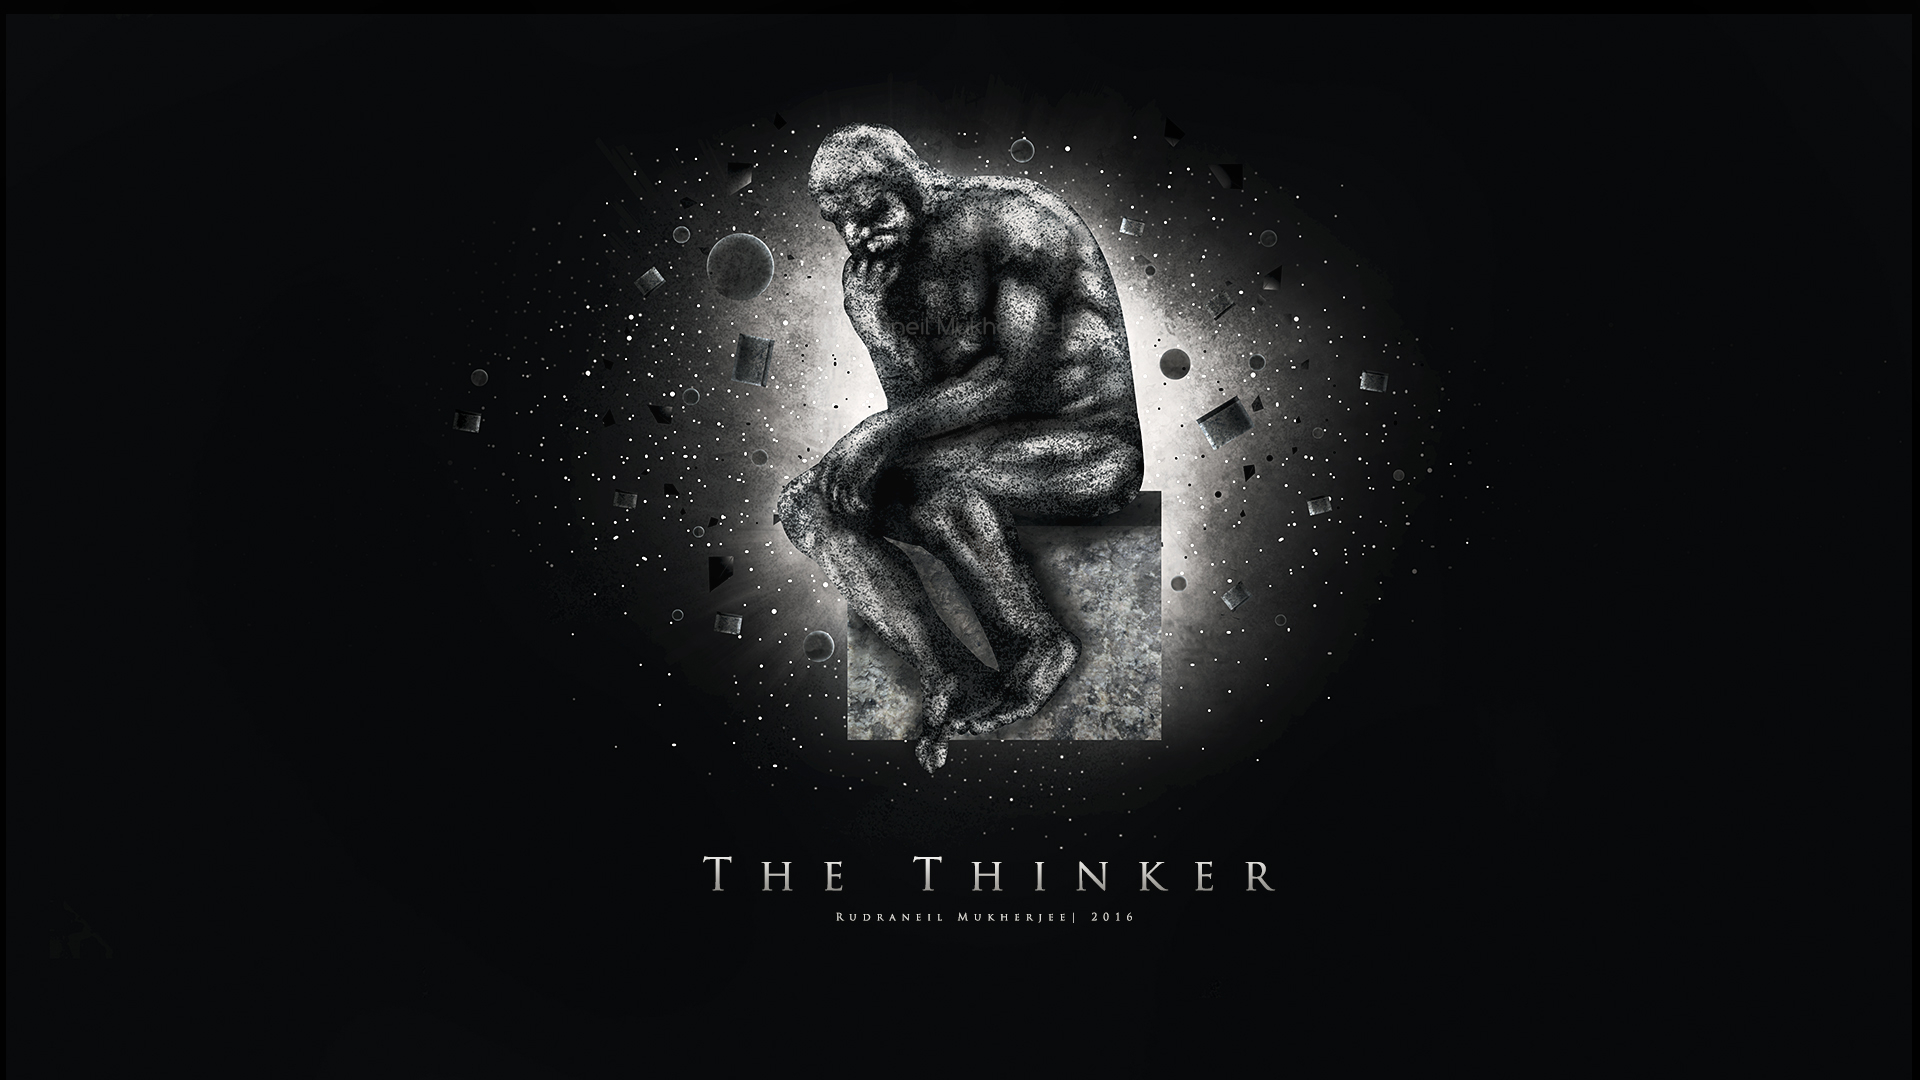 1920x1080 Free download The Thinker Wallpaper by UltraShiva [] for your Desktop, Mobile \u0026 Tablet | Explore 73+ The Thinker Wallpaper | The Thinker Wallpaper, The Hobbit The Shire Wallpaper, The Story The Yellow Wallpaper